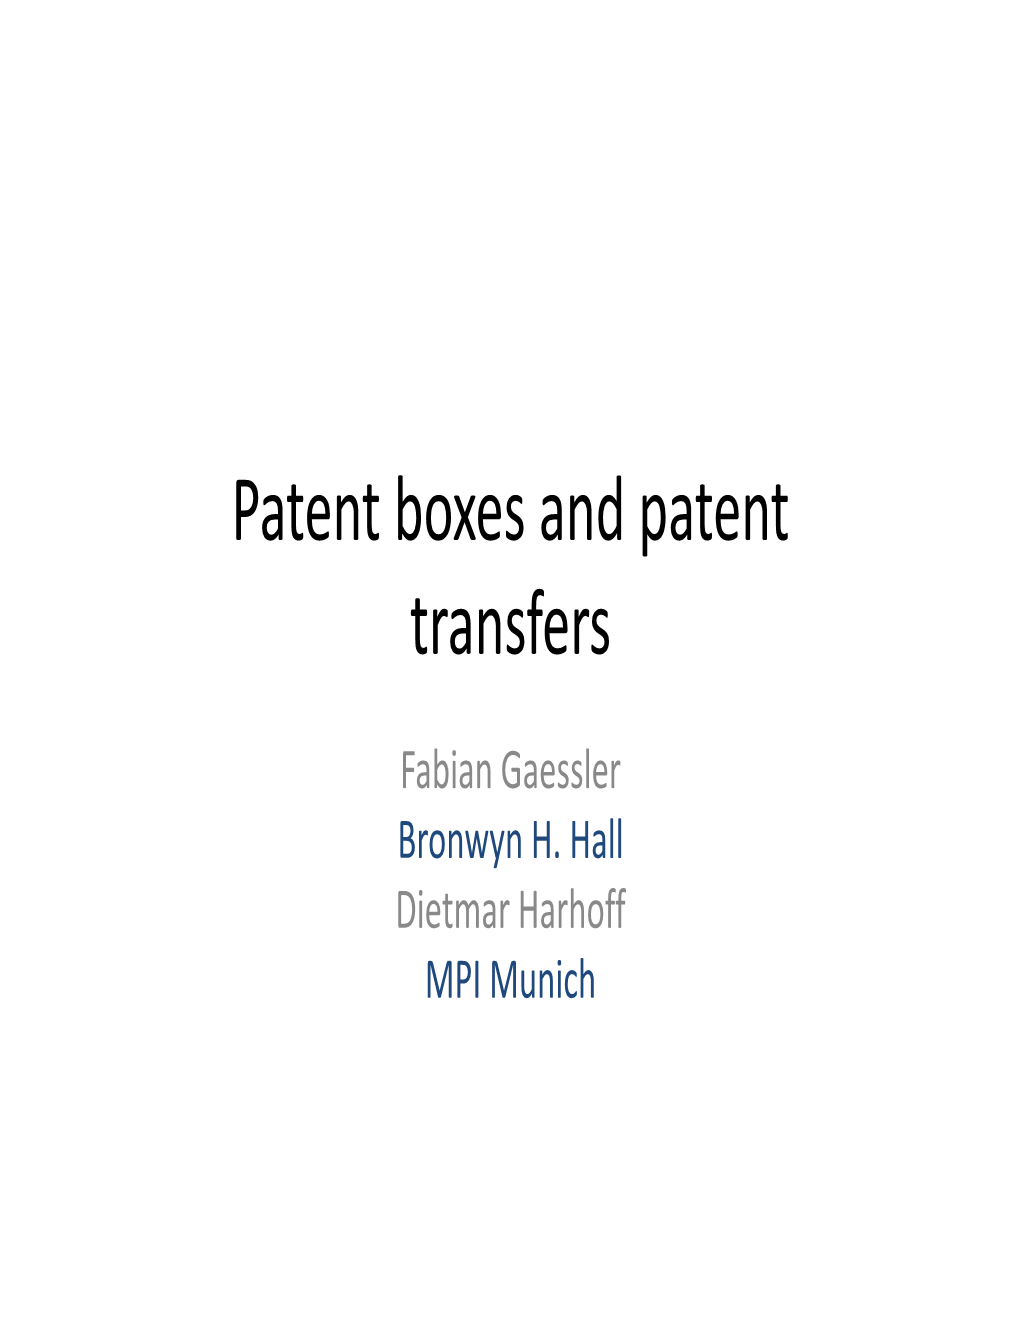 Patent Boxes and Patent Transfers